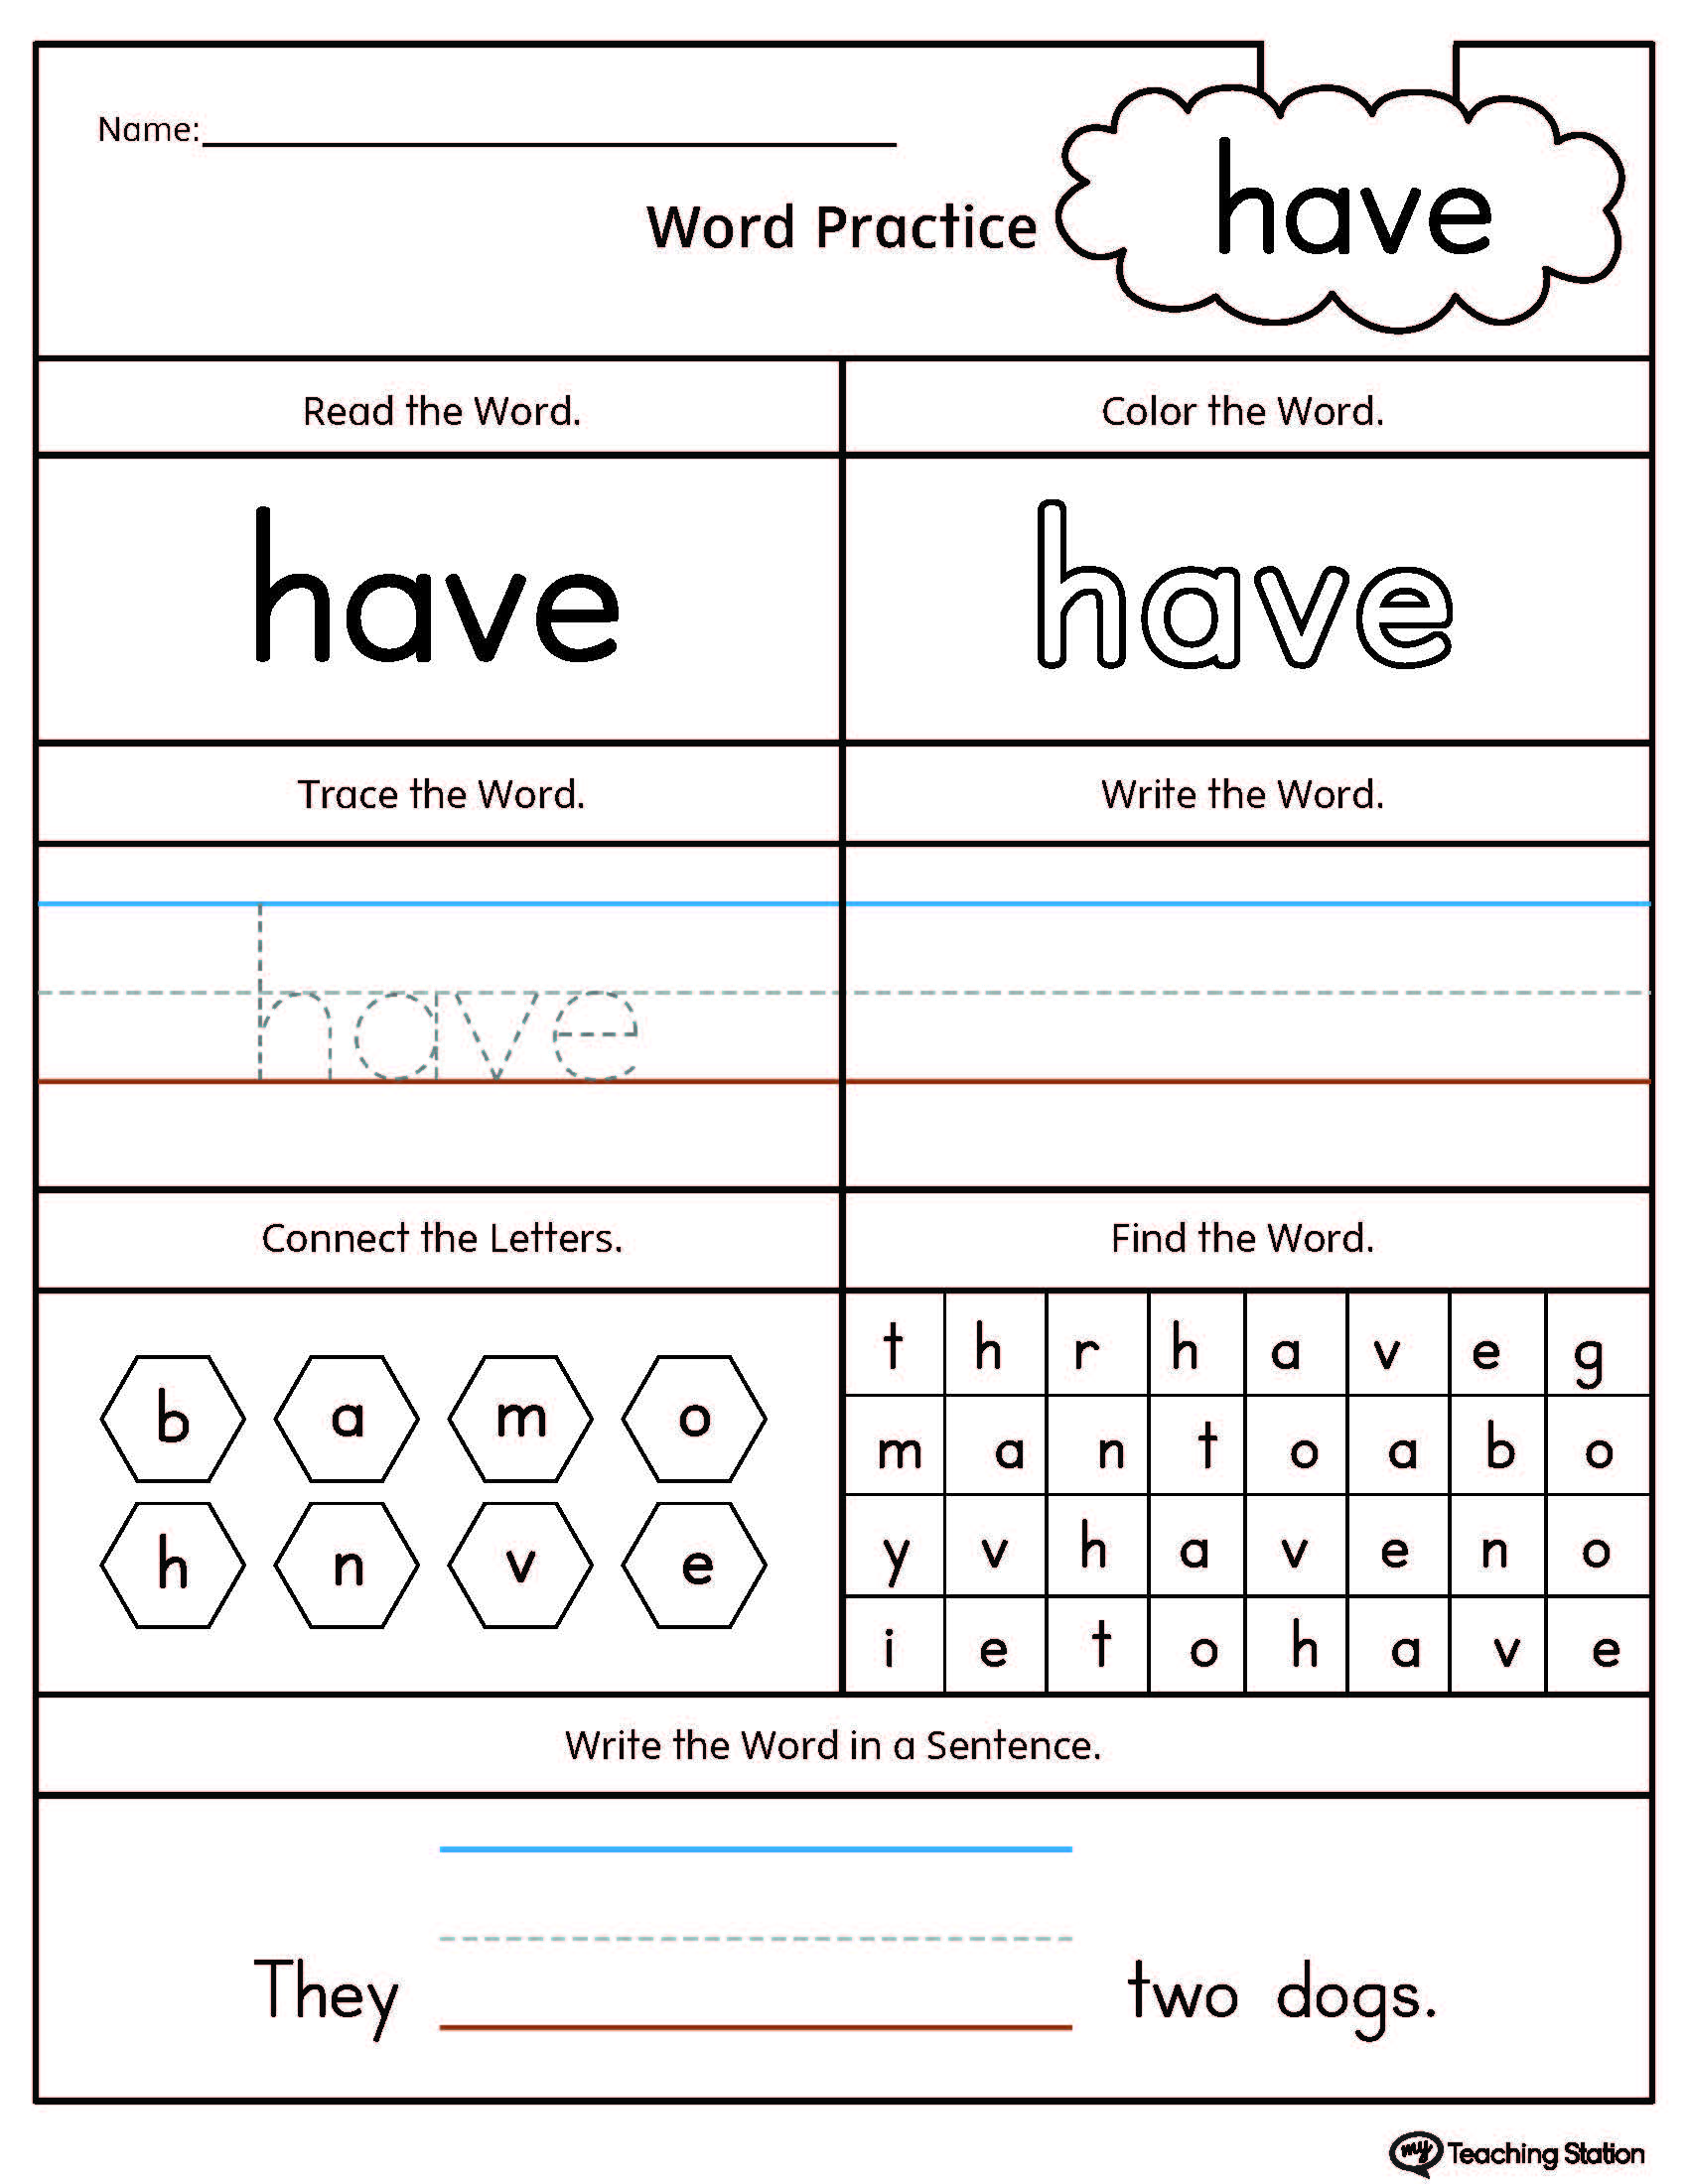 High Frequency Words Printable Worksheets | MyTeachingStation.com